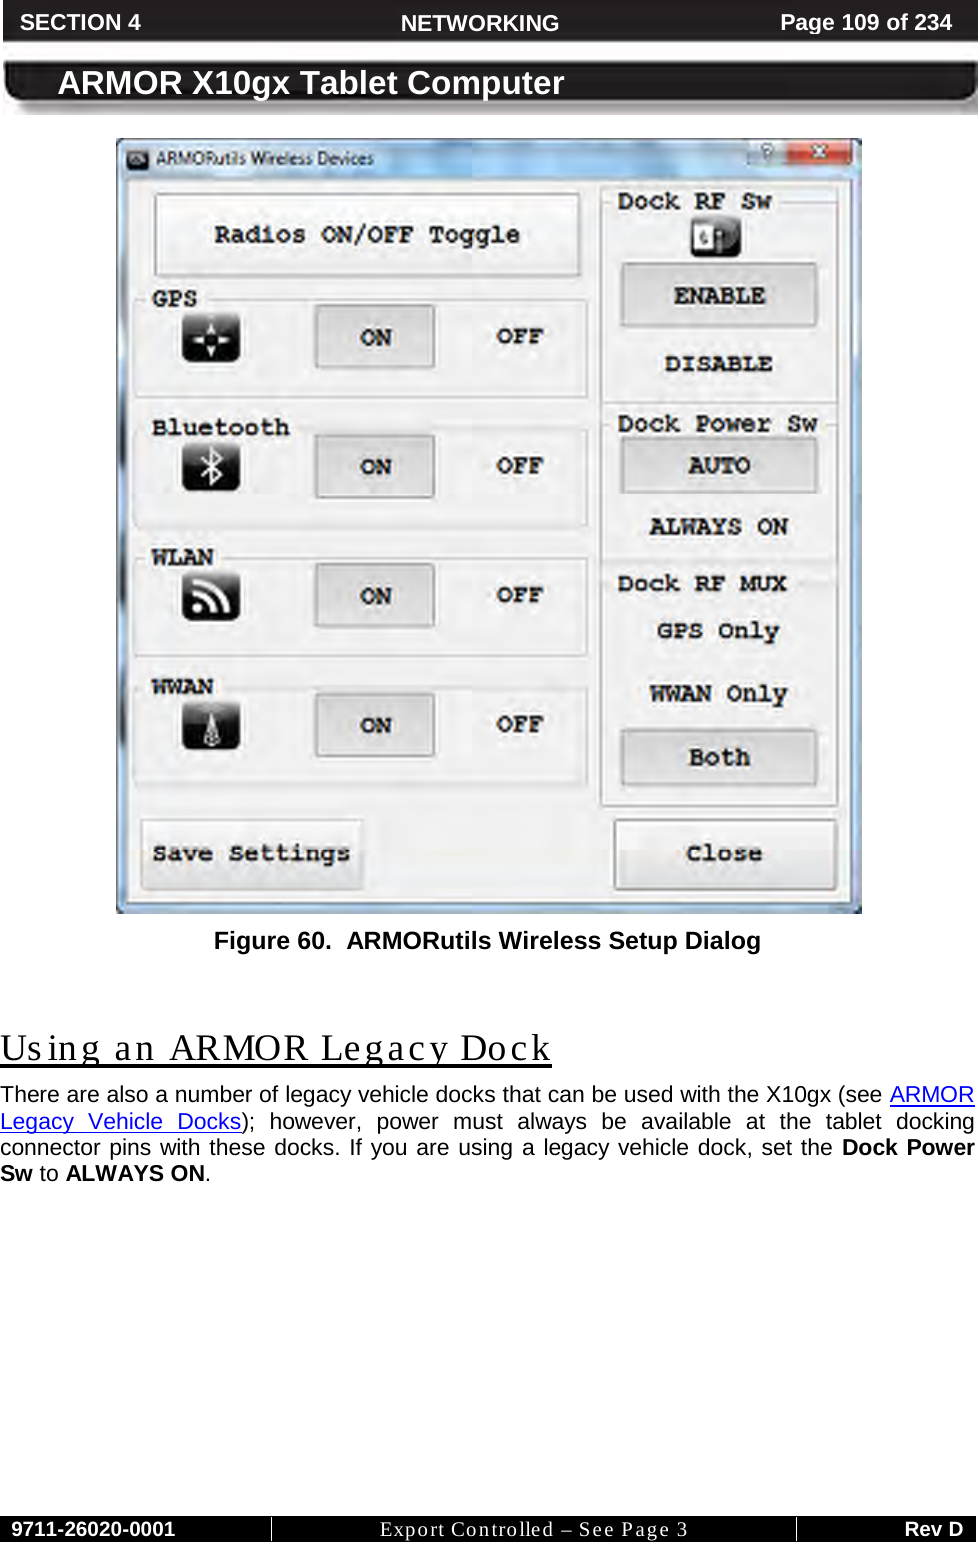     9711-26020-0001 Export Controlled – See Page 3 Rev D SECTION 4 NETWORKING Page 109 of 234  ARMOR X10gx Tablet Computer  Figure 60.  ARMORutils Wireless Setup Dialog  Using an ARMOR Legacy Dock There are also a number of legacy vehicle docks that can be used with the X10gx (see ARMOR Legacy Vehicle Docks); however, power must always be available at the tablet docking connector pins with these docks. If you are using a legacy vehicle dock, set the Dock Power Sw to ALWAYS ON.         